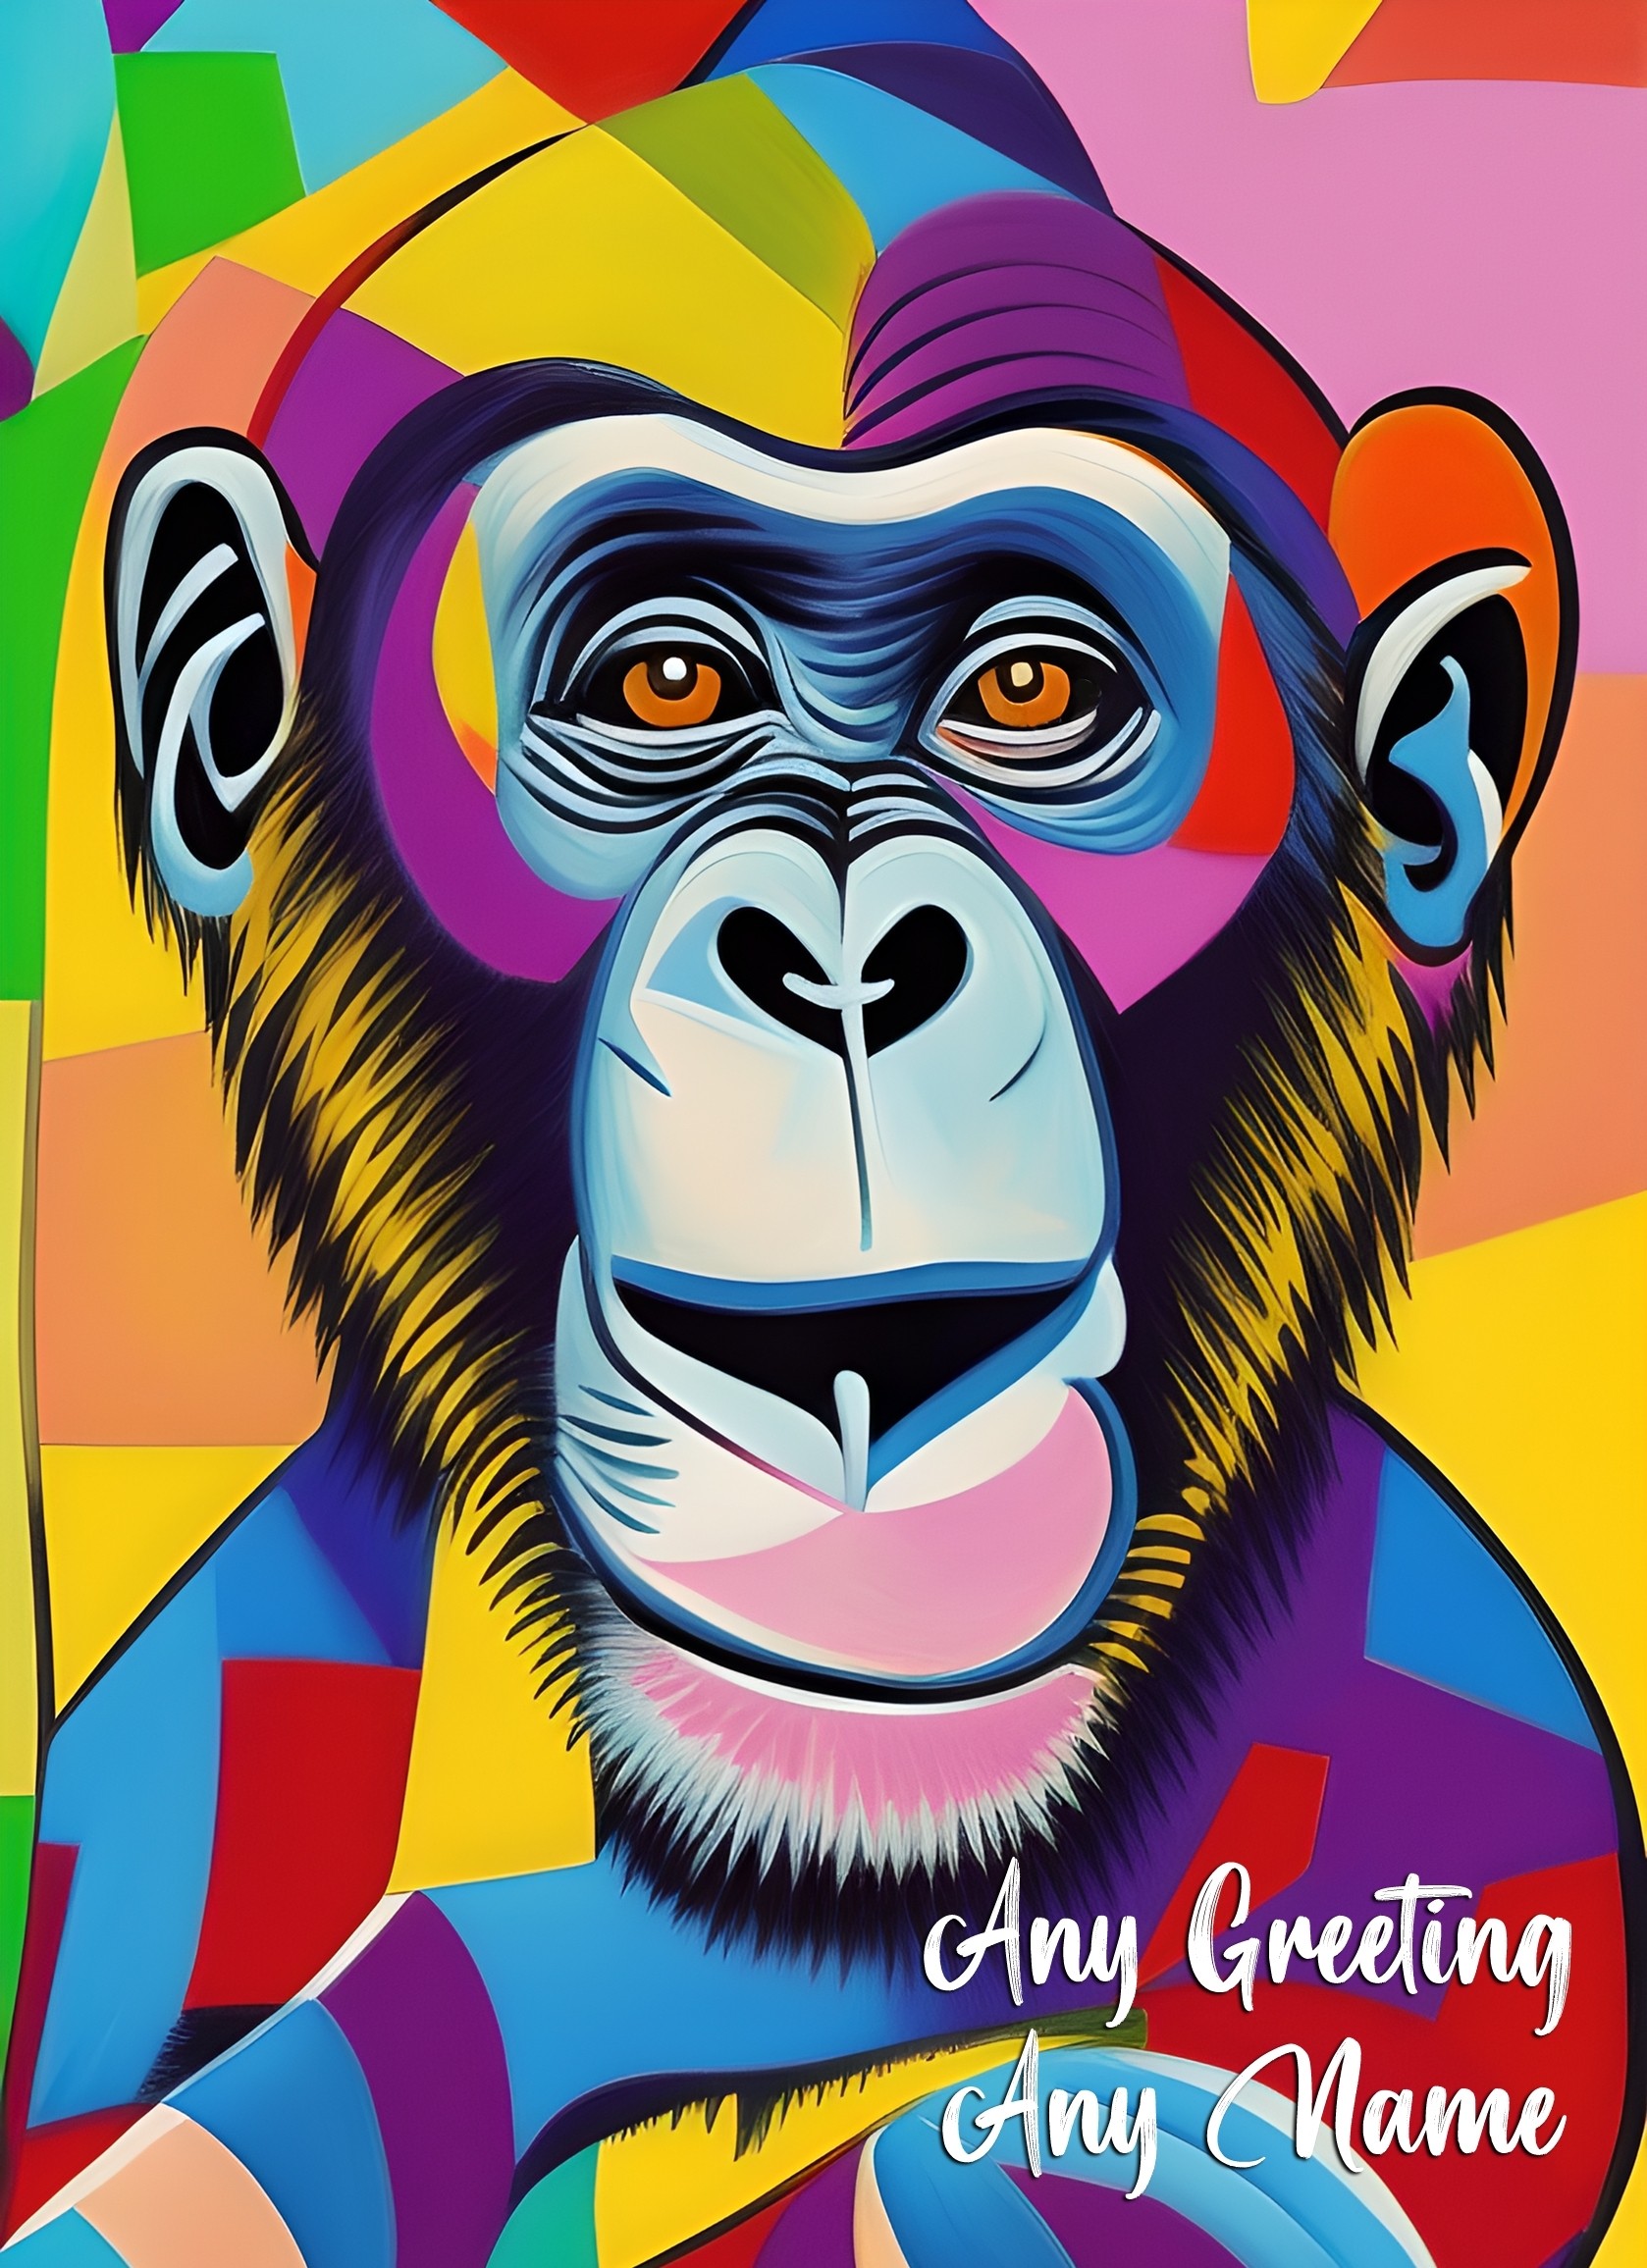 Personalised Monkey Chimpanzee Animal Colourful Abstract Art Blank Greeting Card (Birthday, Fathers Day, Any Occasion)